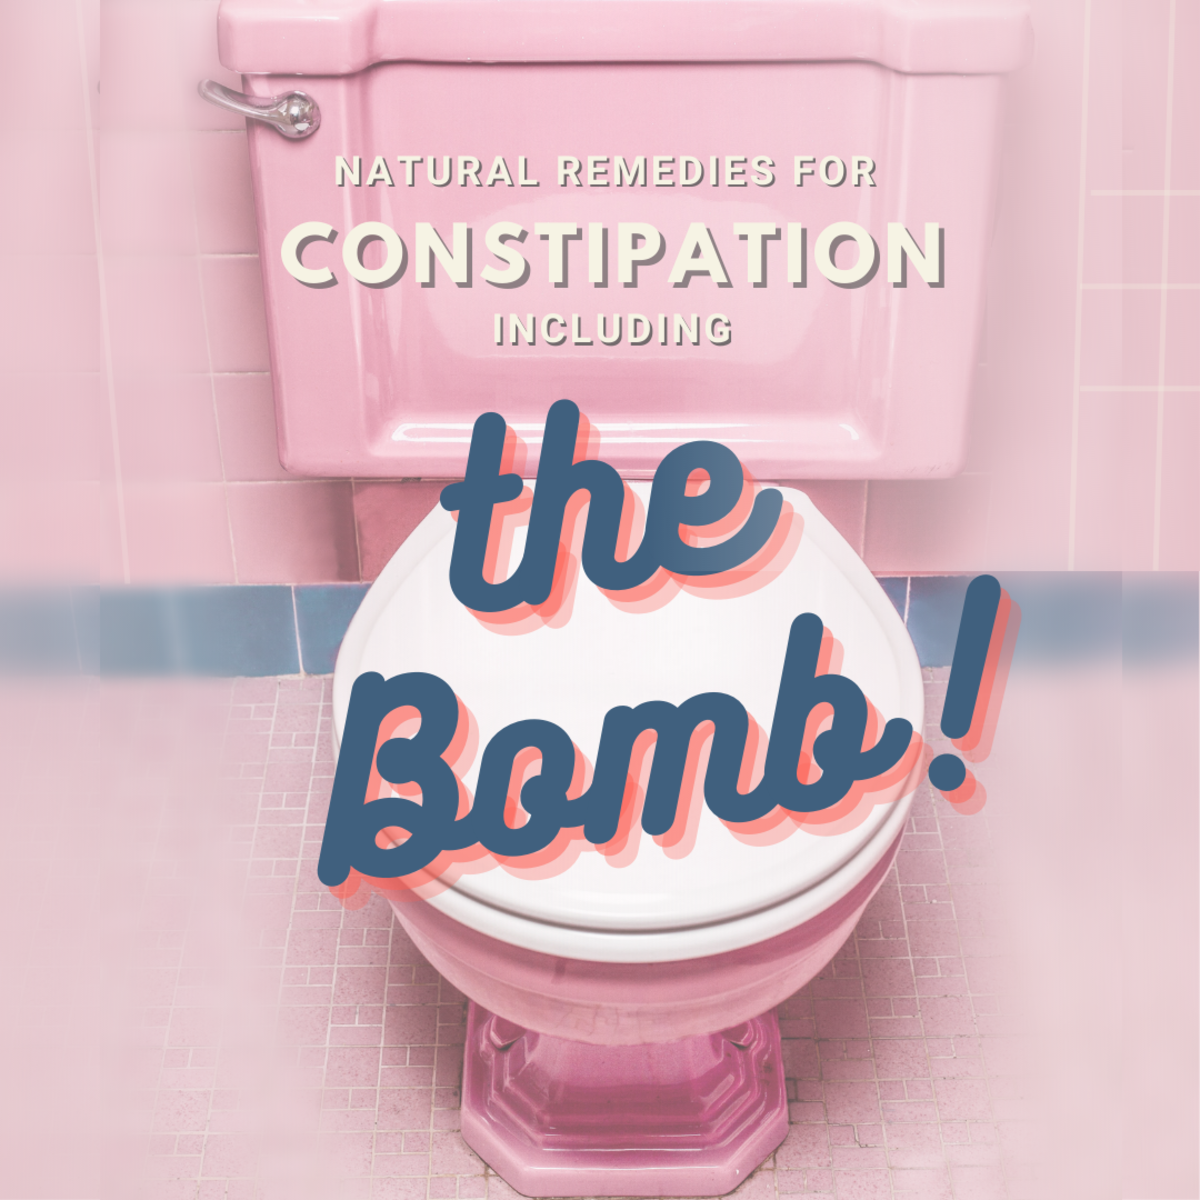 Have constipation? "The Bomb" will help you no doubt!